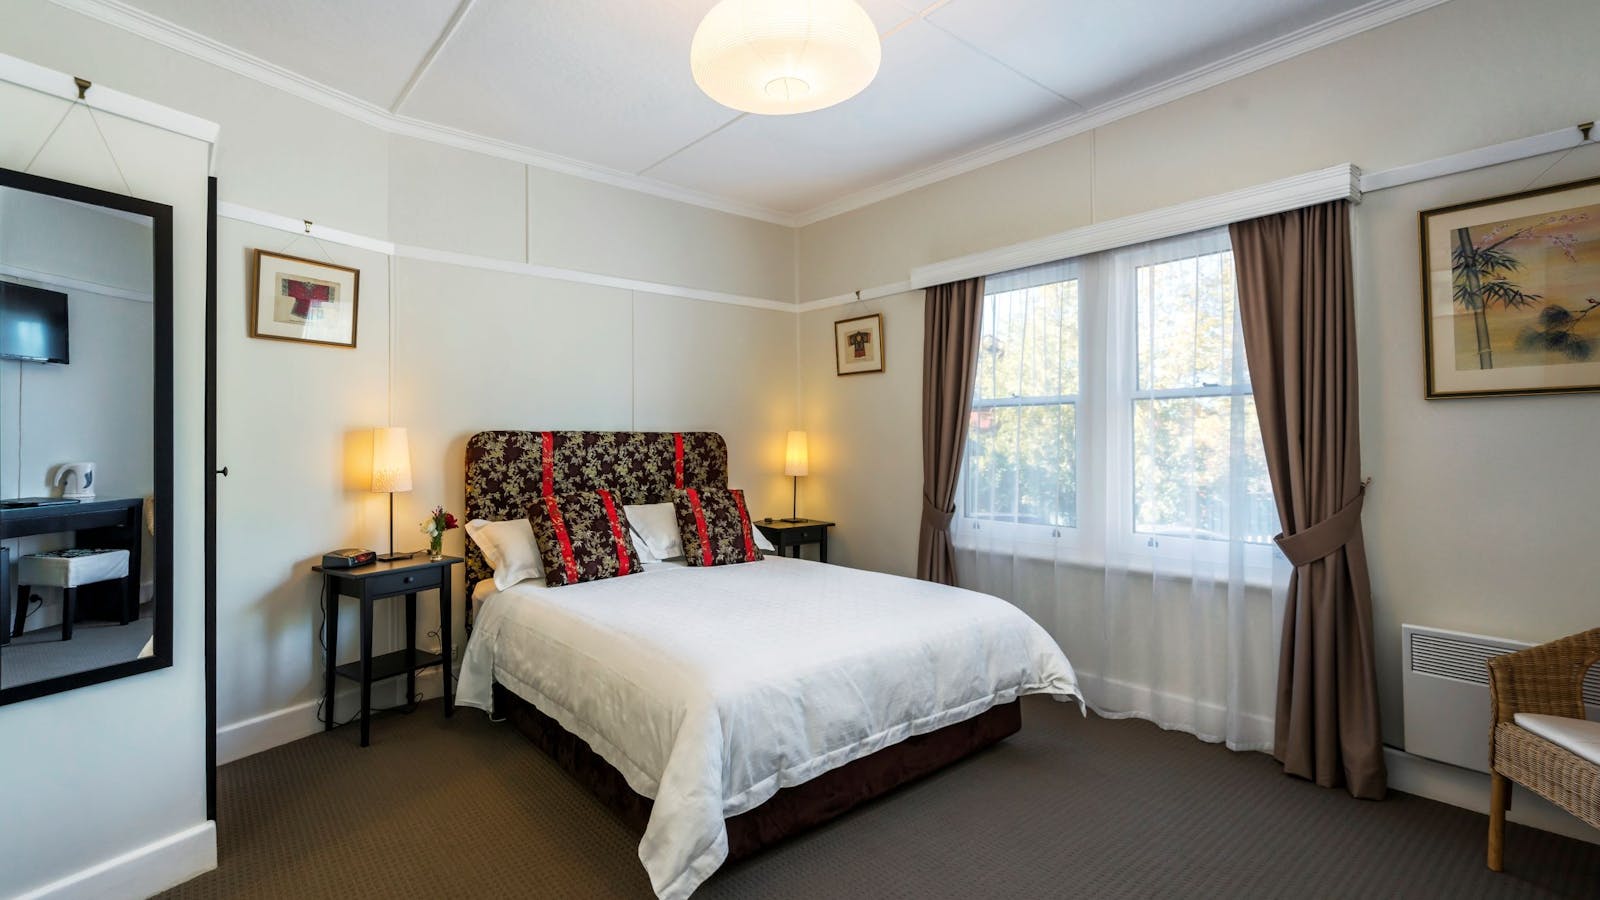 Superior Queen Room with walk-in ensuite shower room.